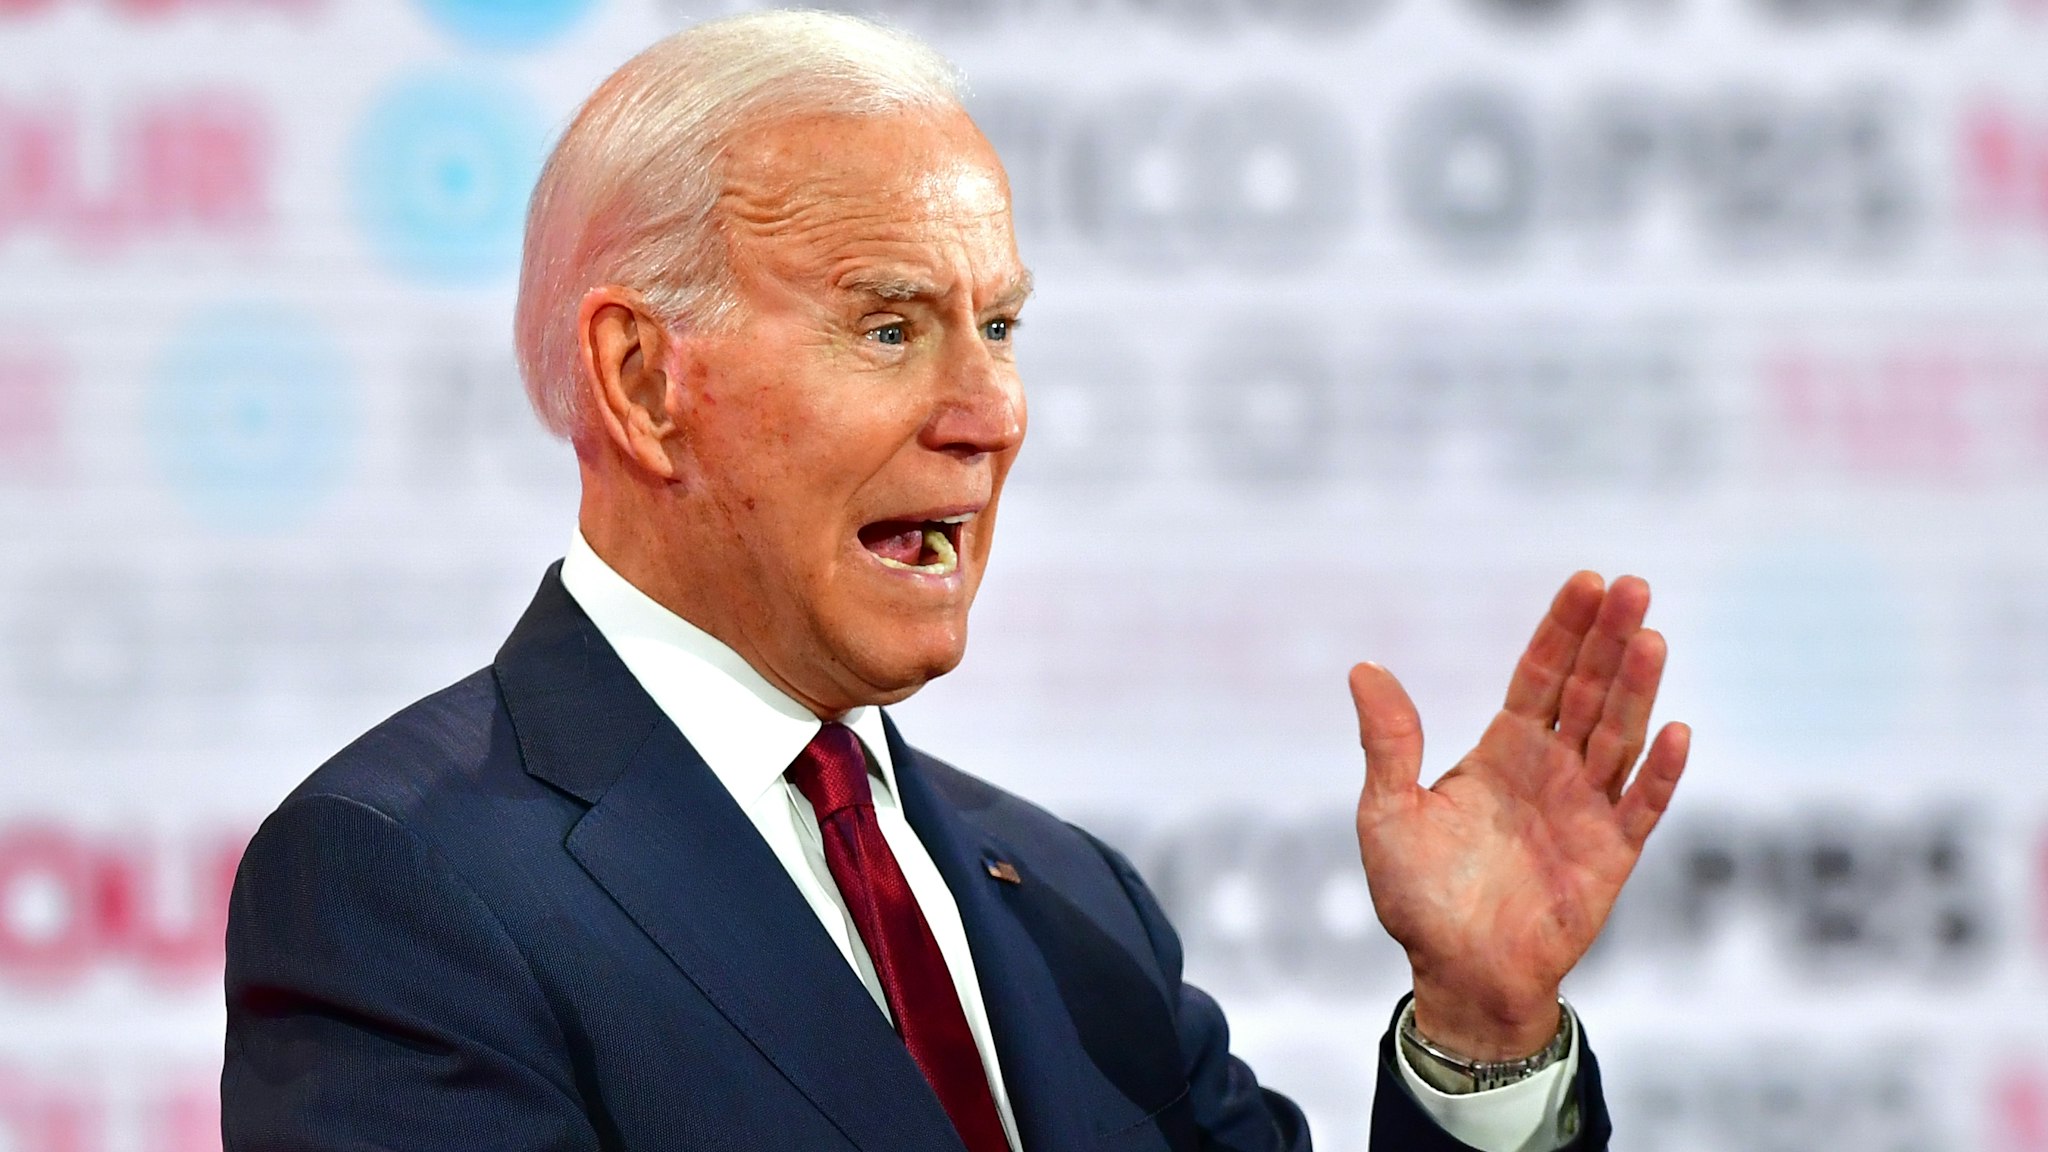 Democratic presidential hopeful former Vice President Joe Biden takes part in the sixth Democratic primary debate of the 2020 presidential campaign season co-hosted by PBS NewsHour &amp; Politico at Loyola Marymount University in Los Angeles, California on December 19, 2019.